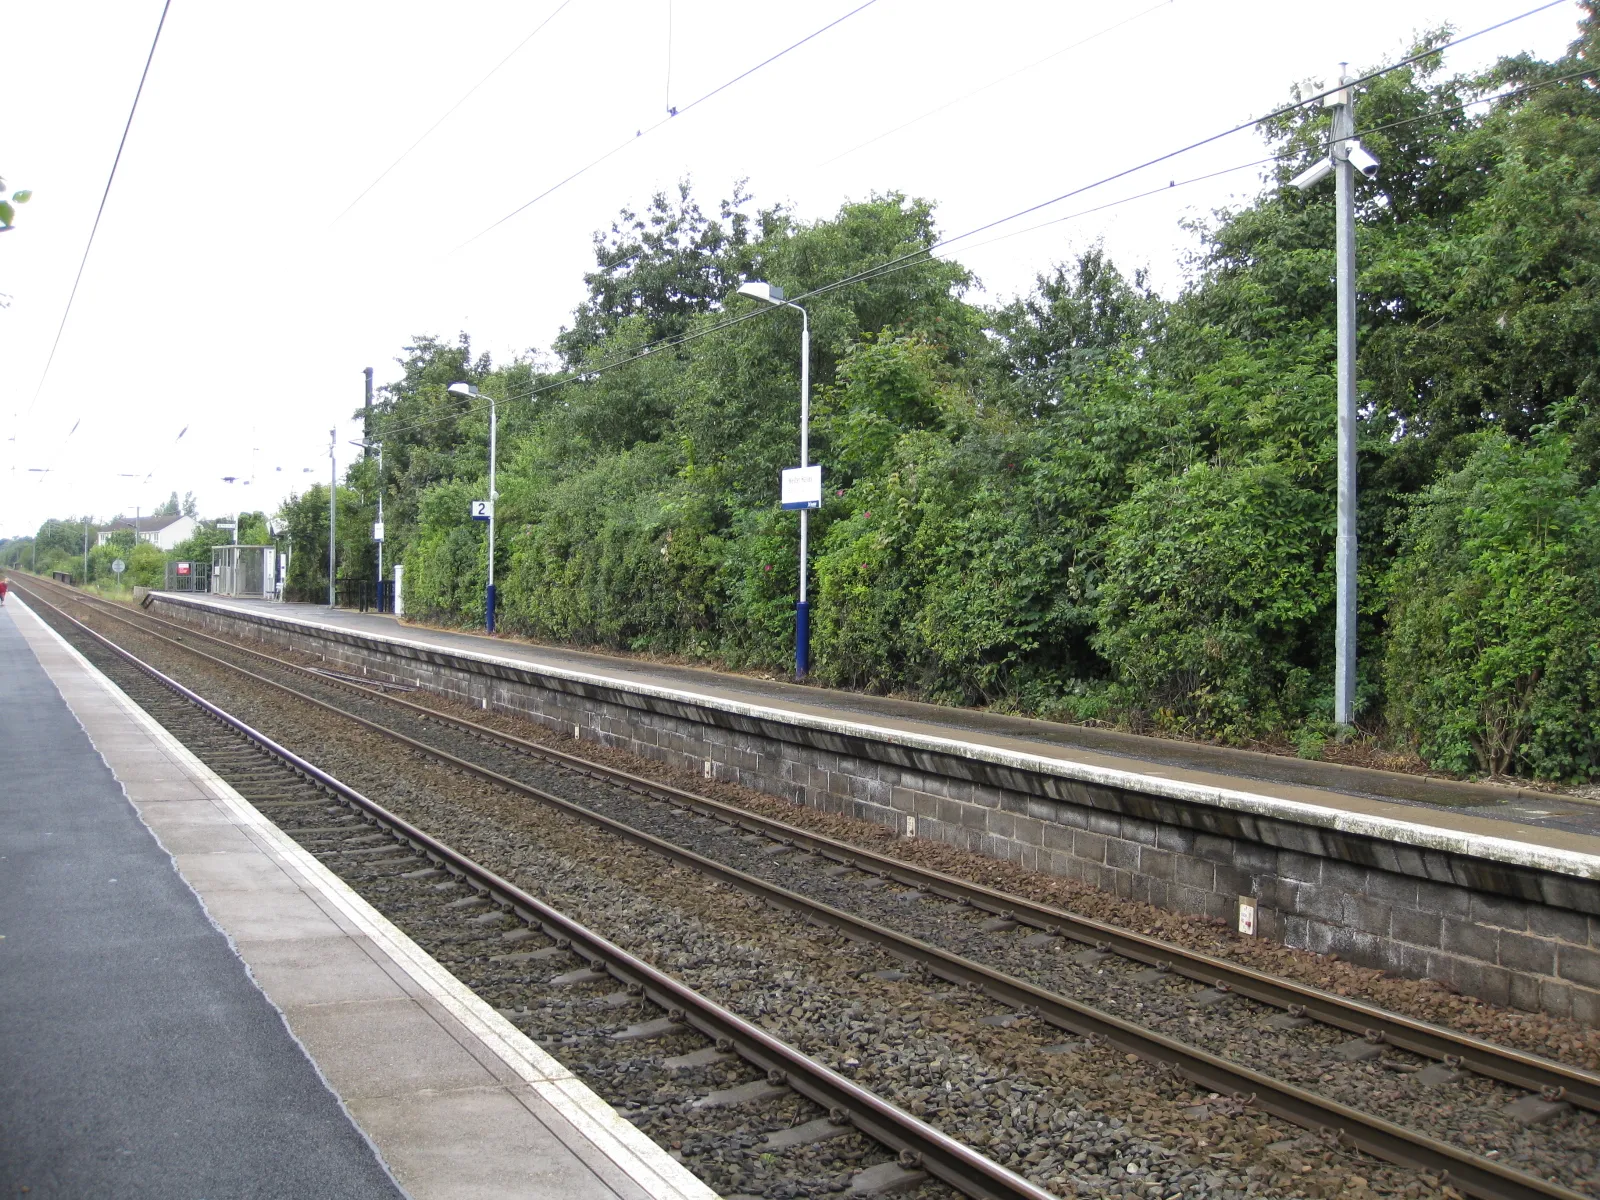 Photo showing: A view of Wester Hailes railway station, looking west. Picture taken 25 August 2012.